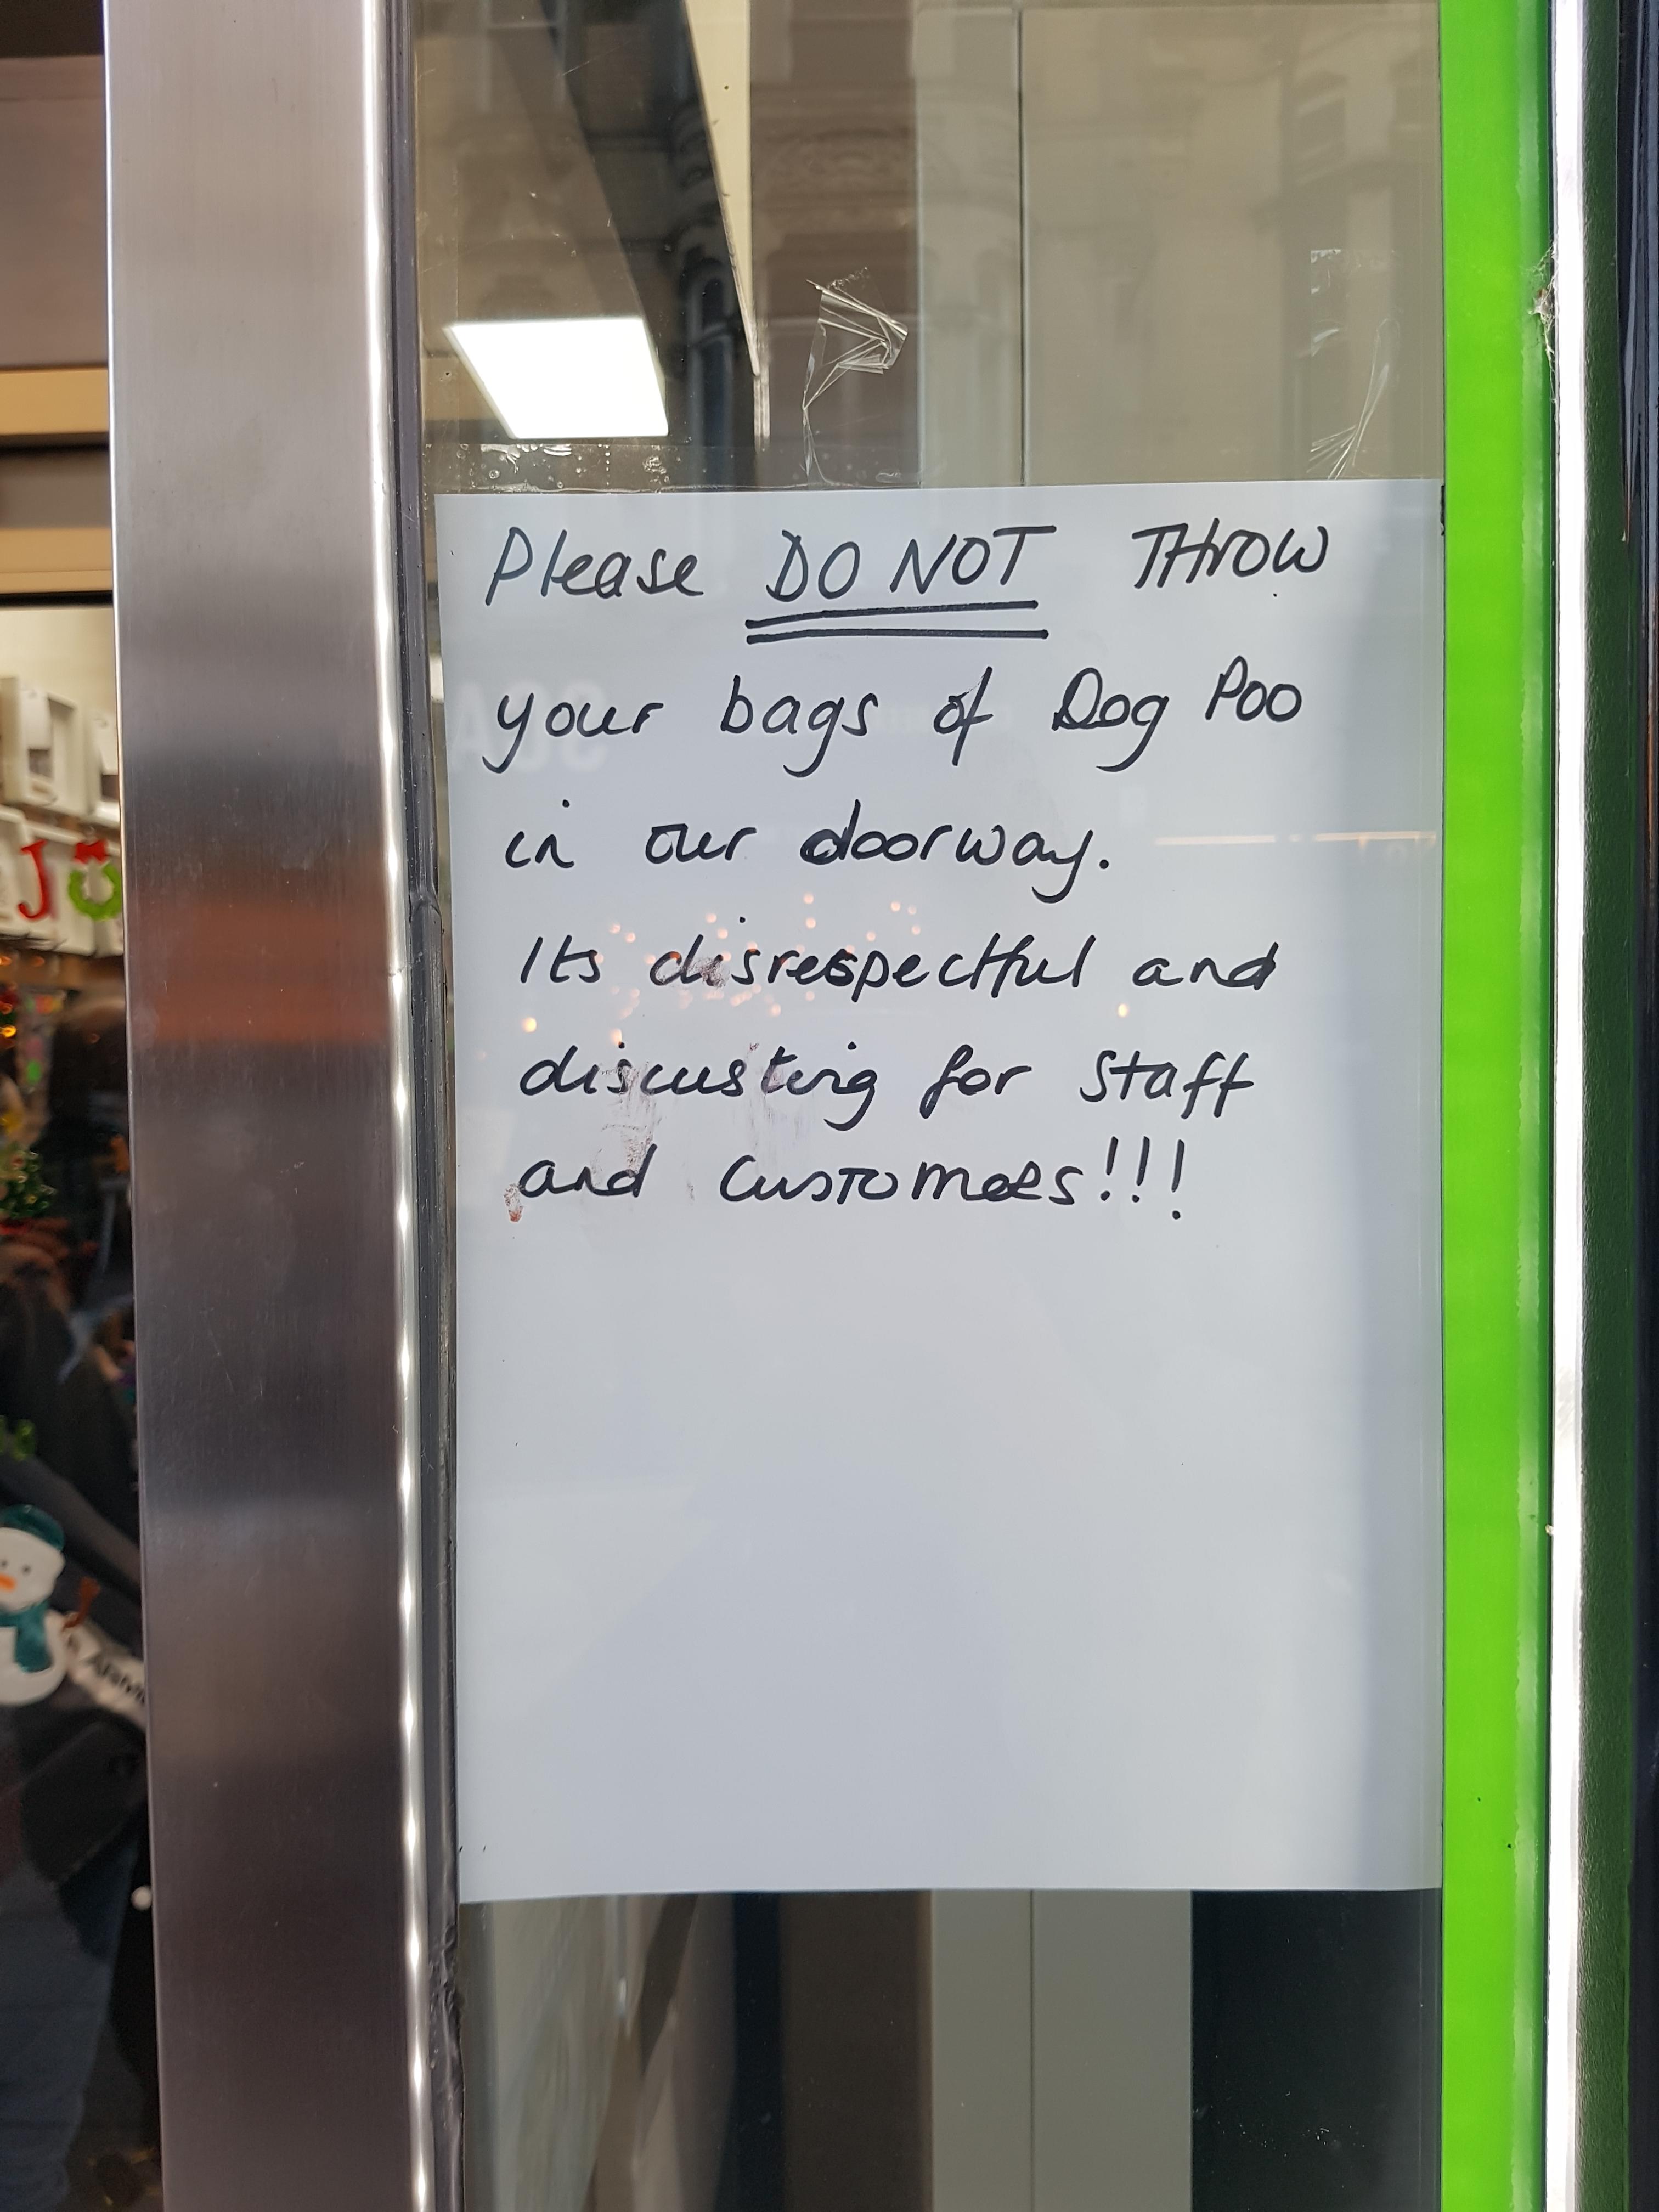 sign - Please Do Not Throw your bags of Dog Poo in our doorway. It's disrespectful and discusting for Staff and customees!!!